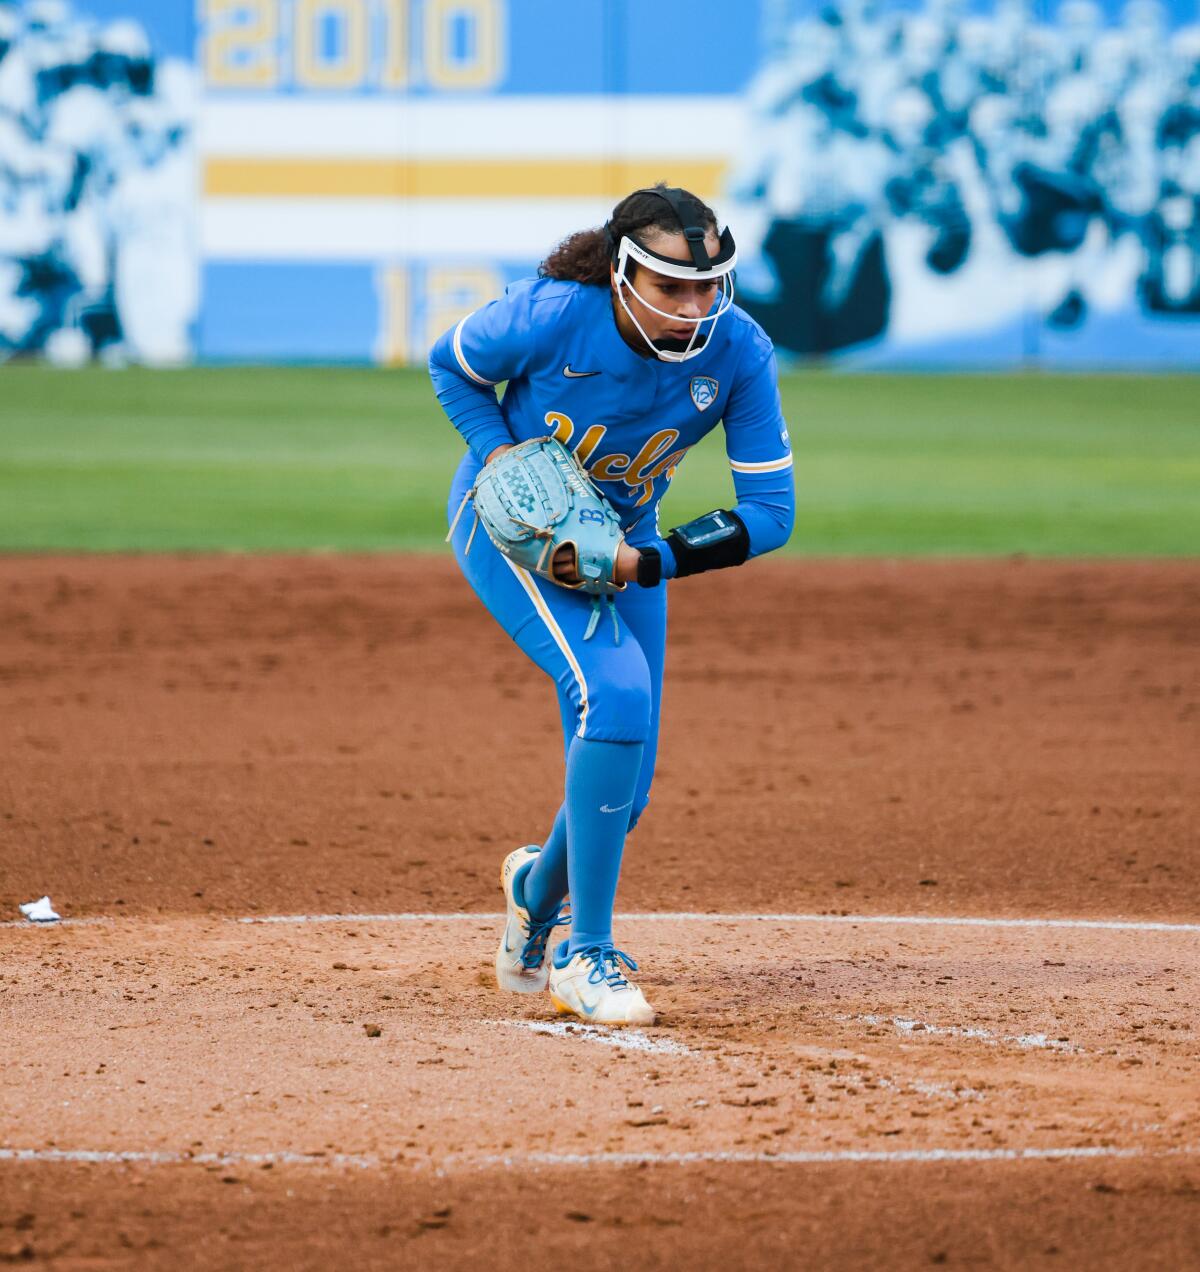 UCLA right-hander Taylor Tinsley ends up in the pitching circle in a face mask and blue uniform